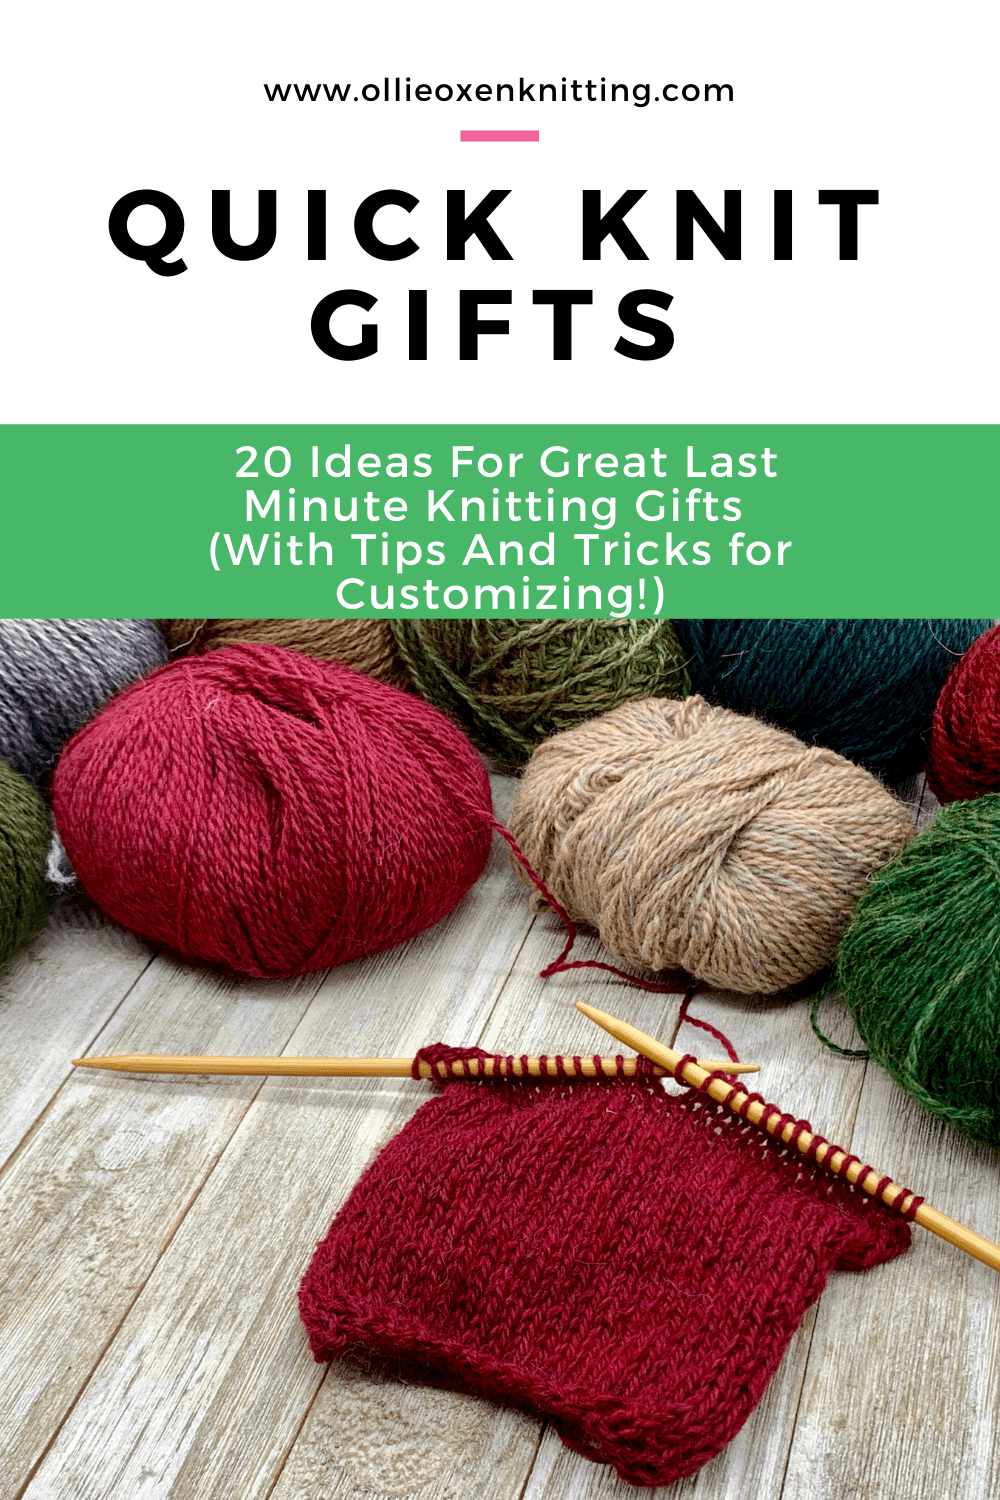 Quick Knit Gifts: 20 Ideas For Great Last Minute Knitting Gifts (With Tips And Tricks for Customizing!) | Ollie Oxen Knitting